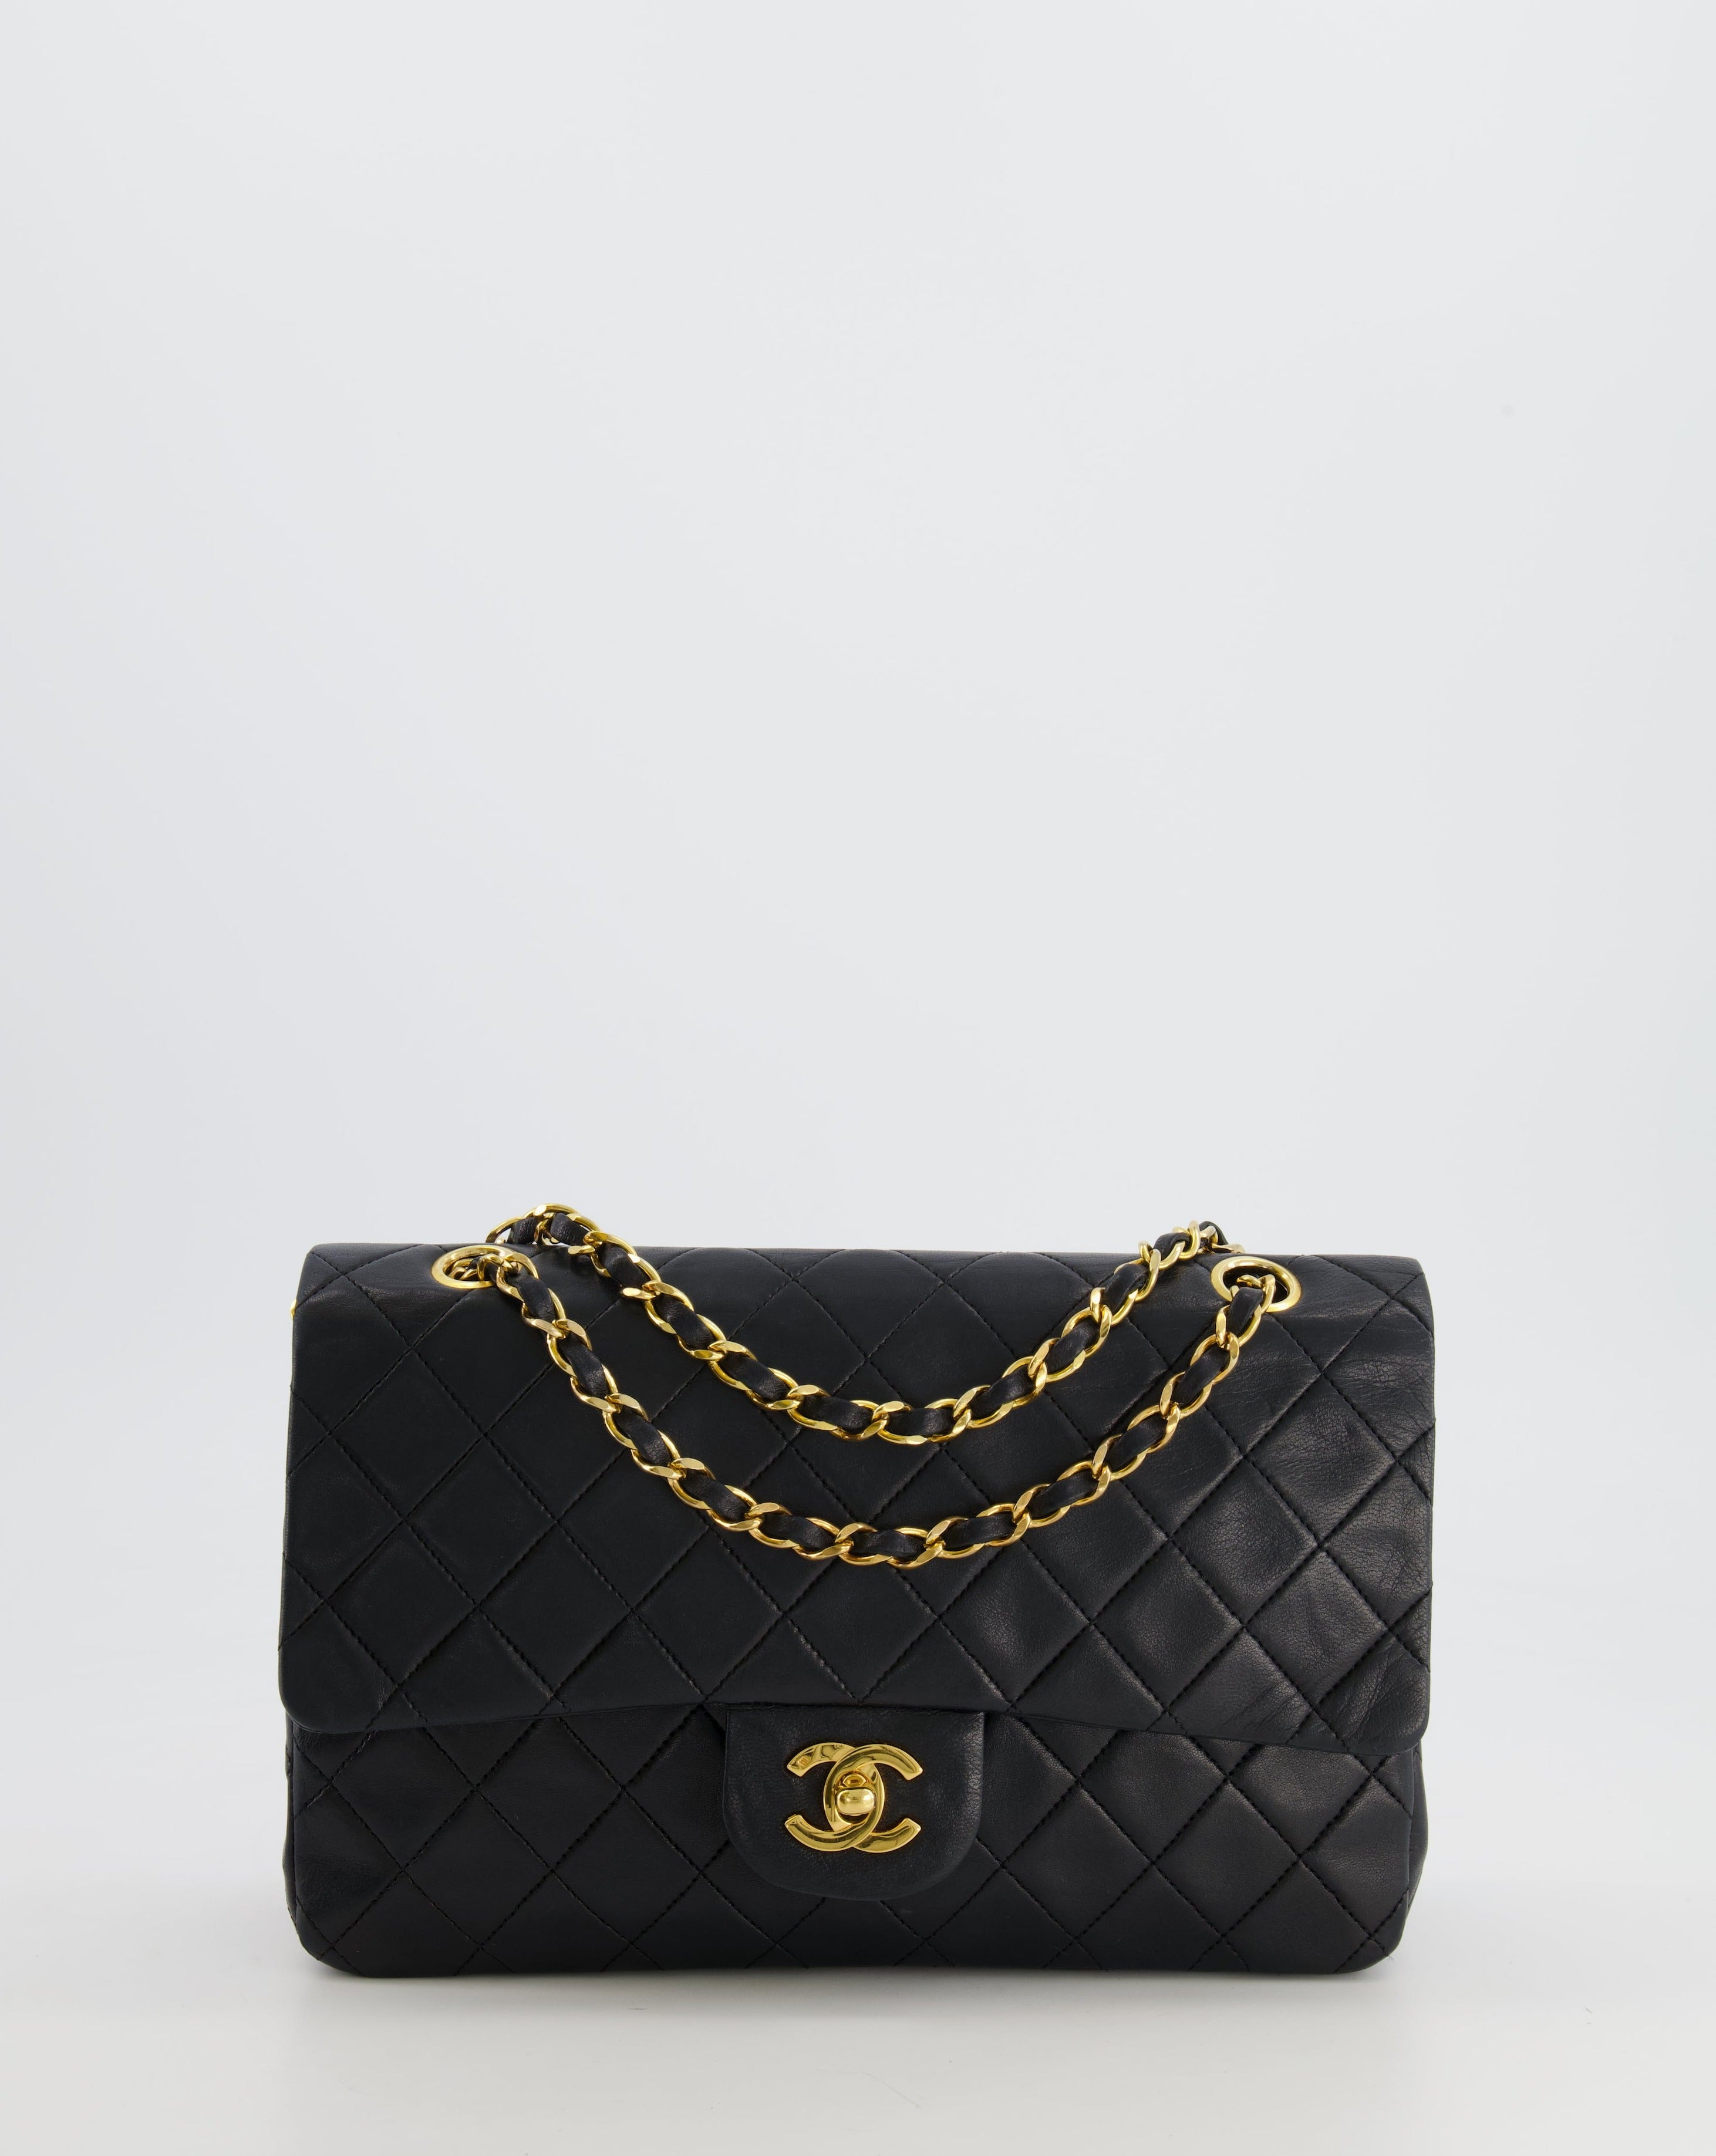 Chanel Black Vintage Classic Medium Double Flap Bag in Lambskin Leather With 24k Gold Hardware